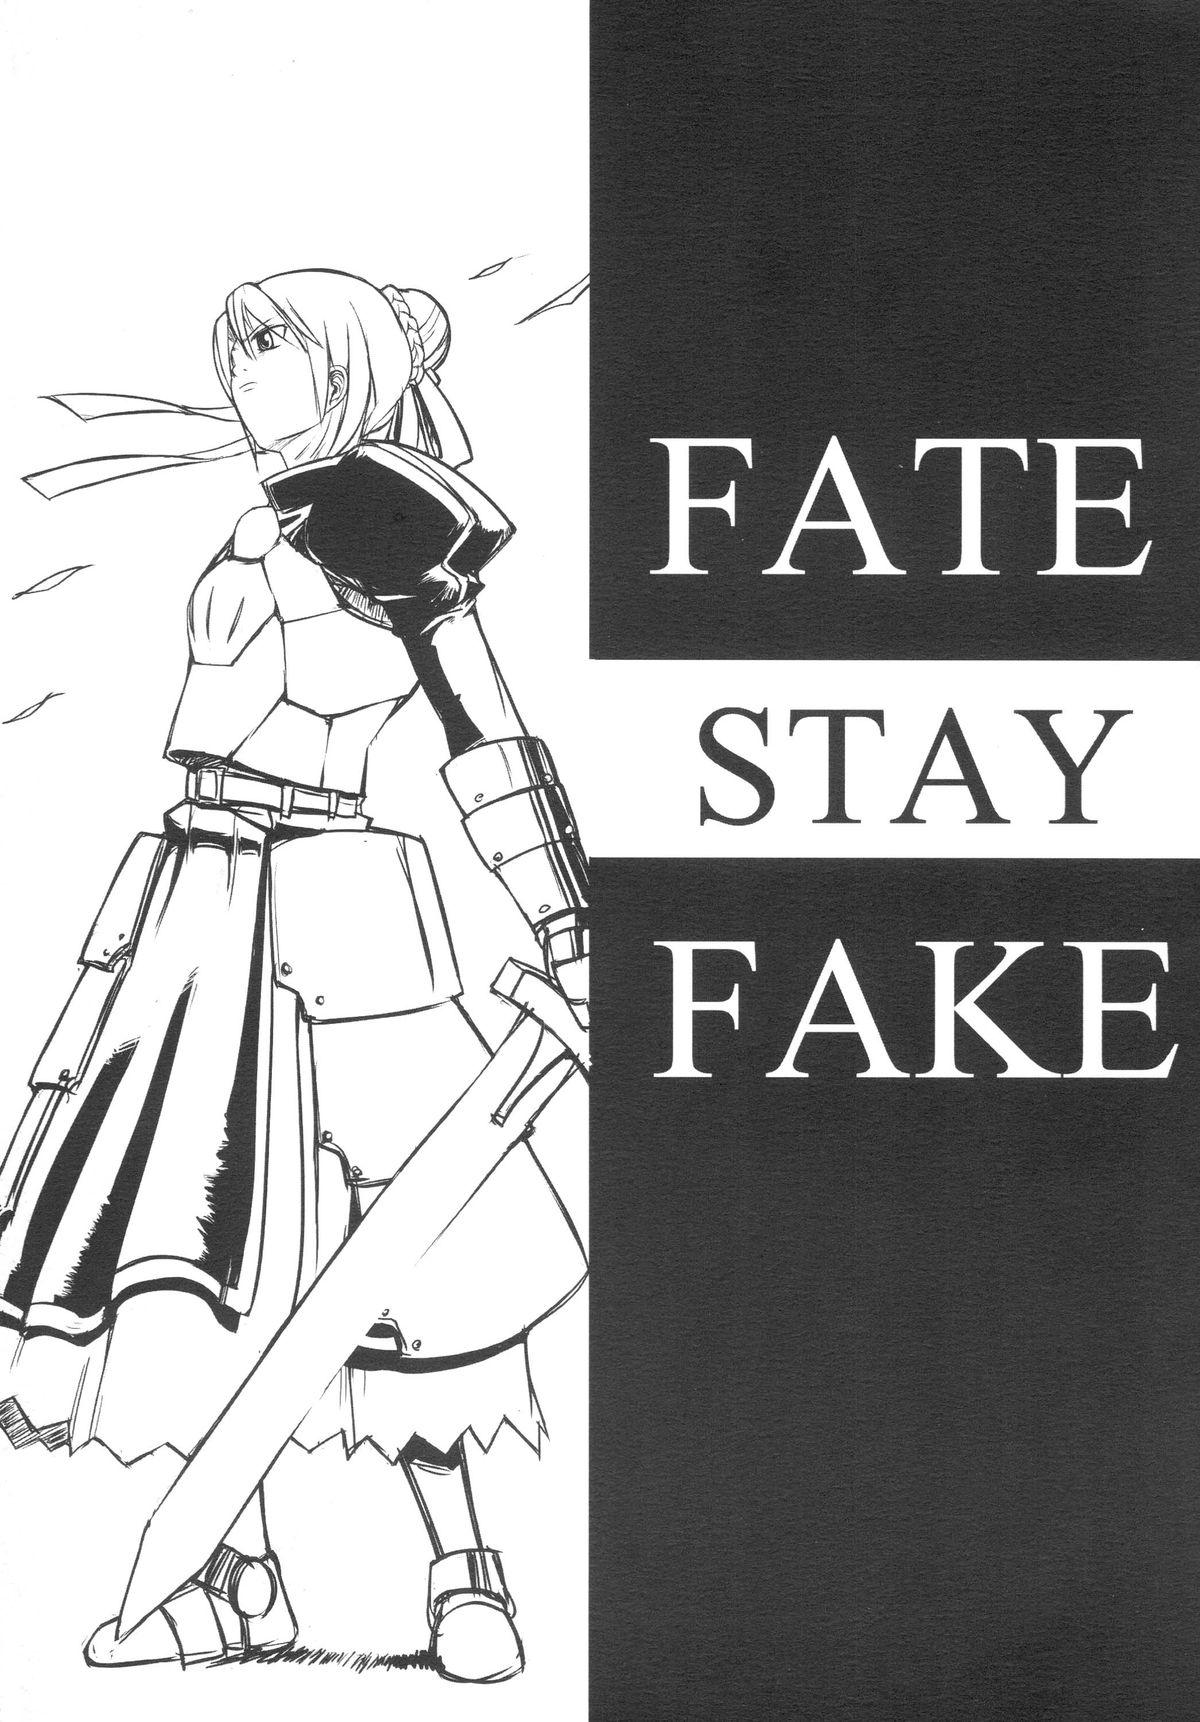 FATE STAY FAKE 30